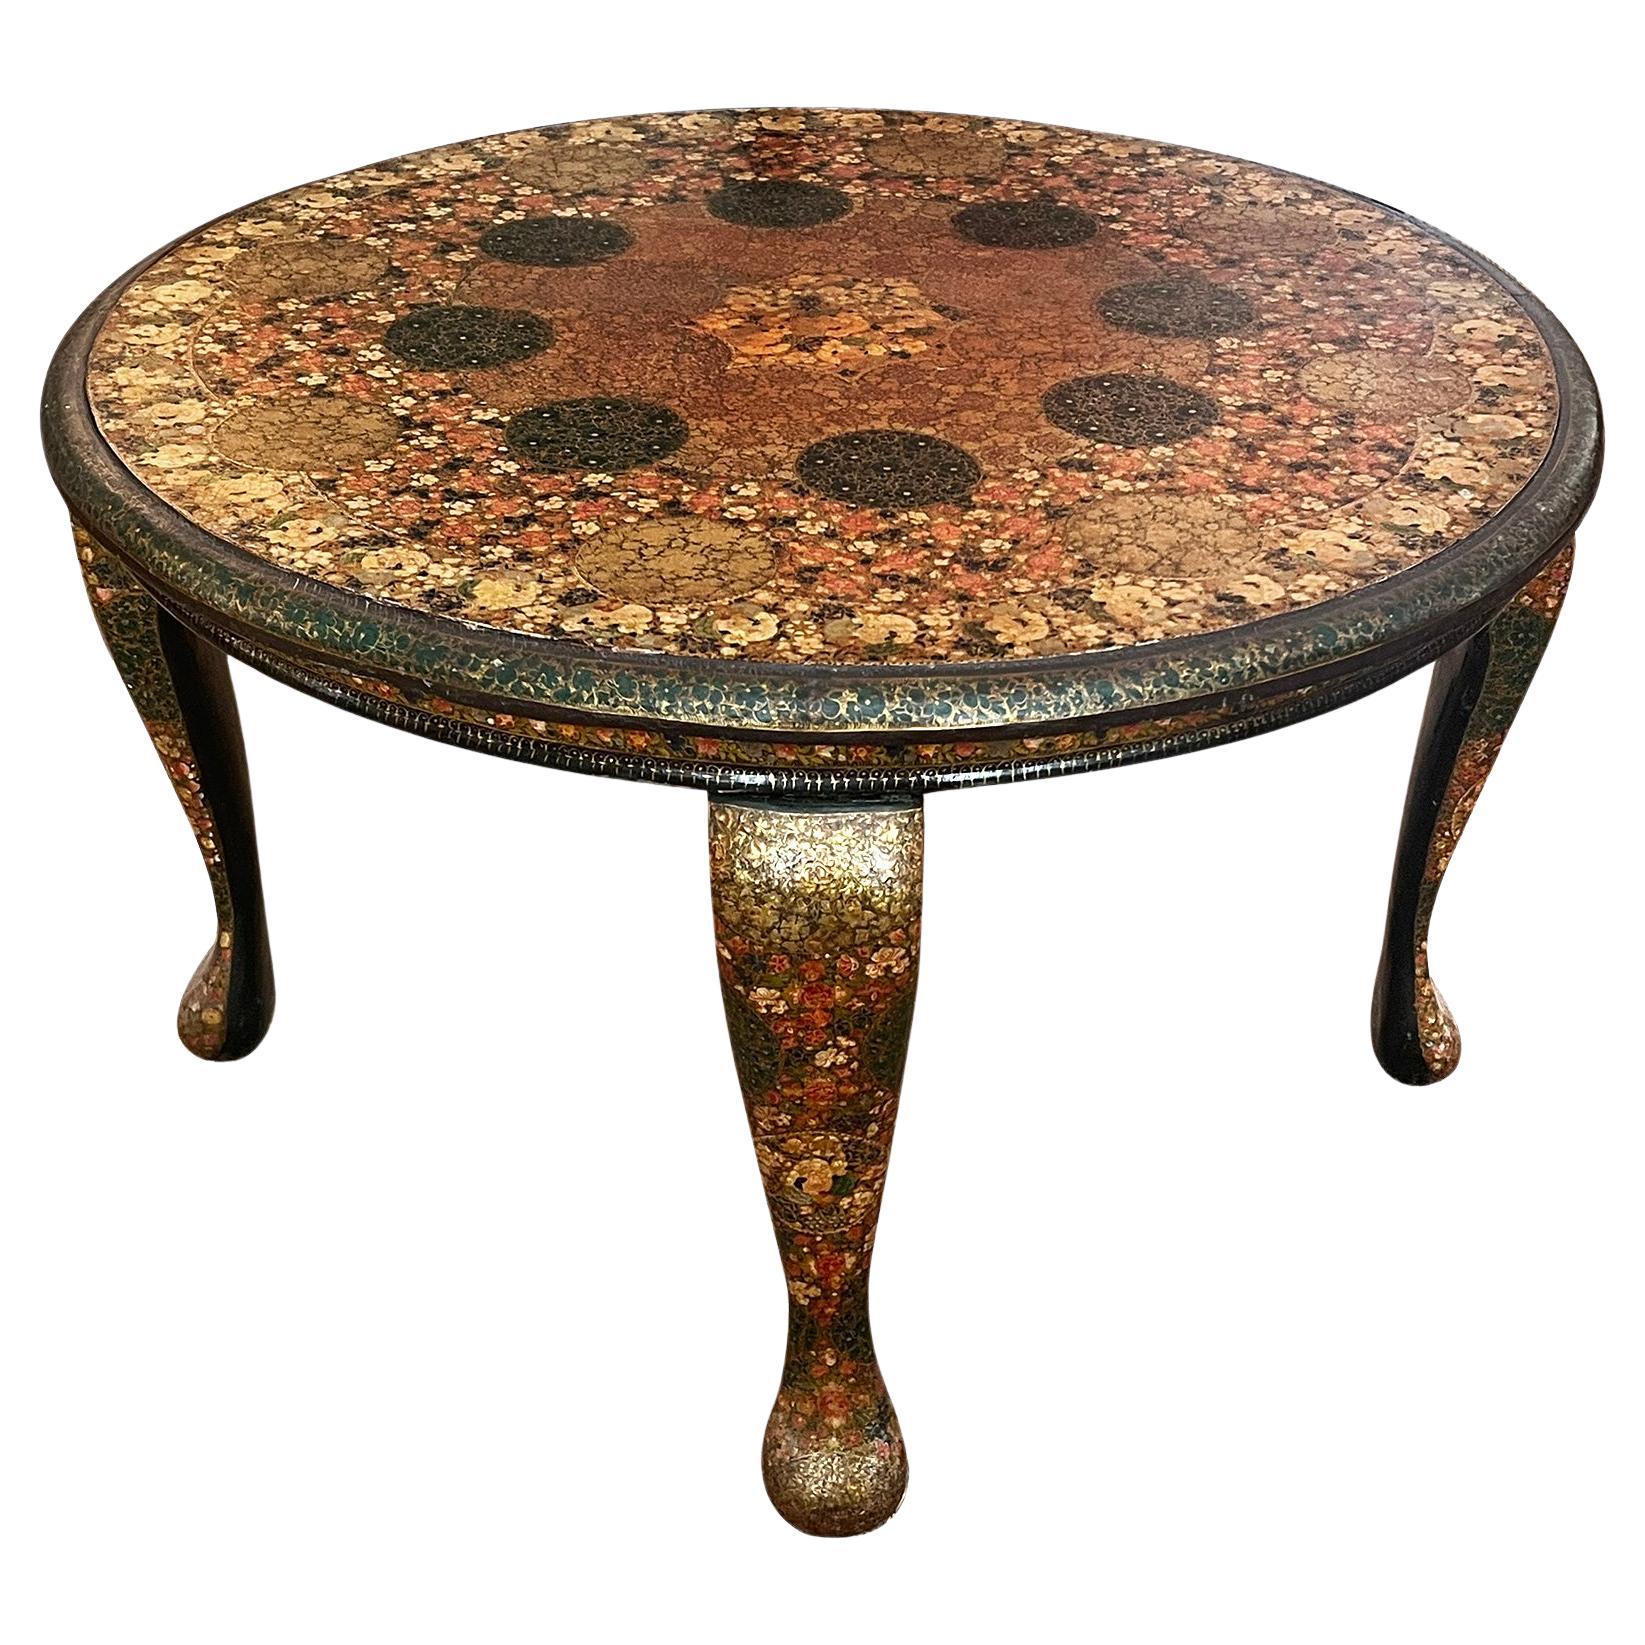 A Kashmir Lacquered Wood Circular Low/Coffee Table